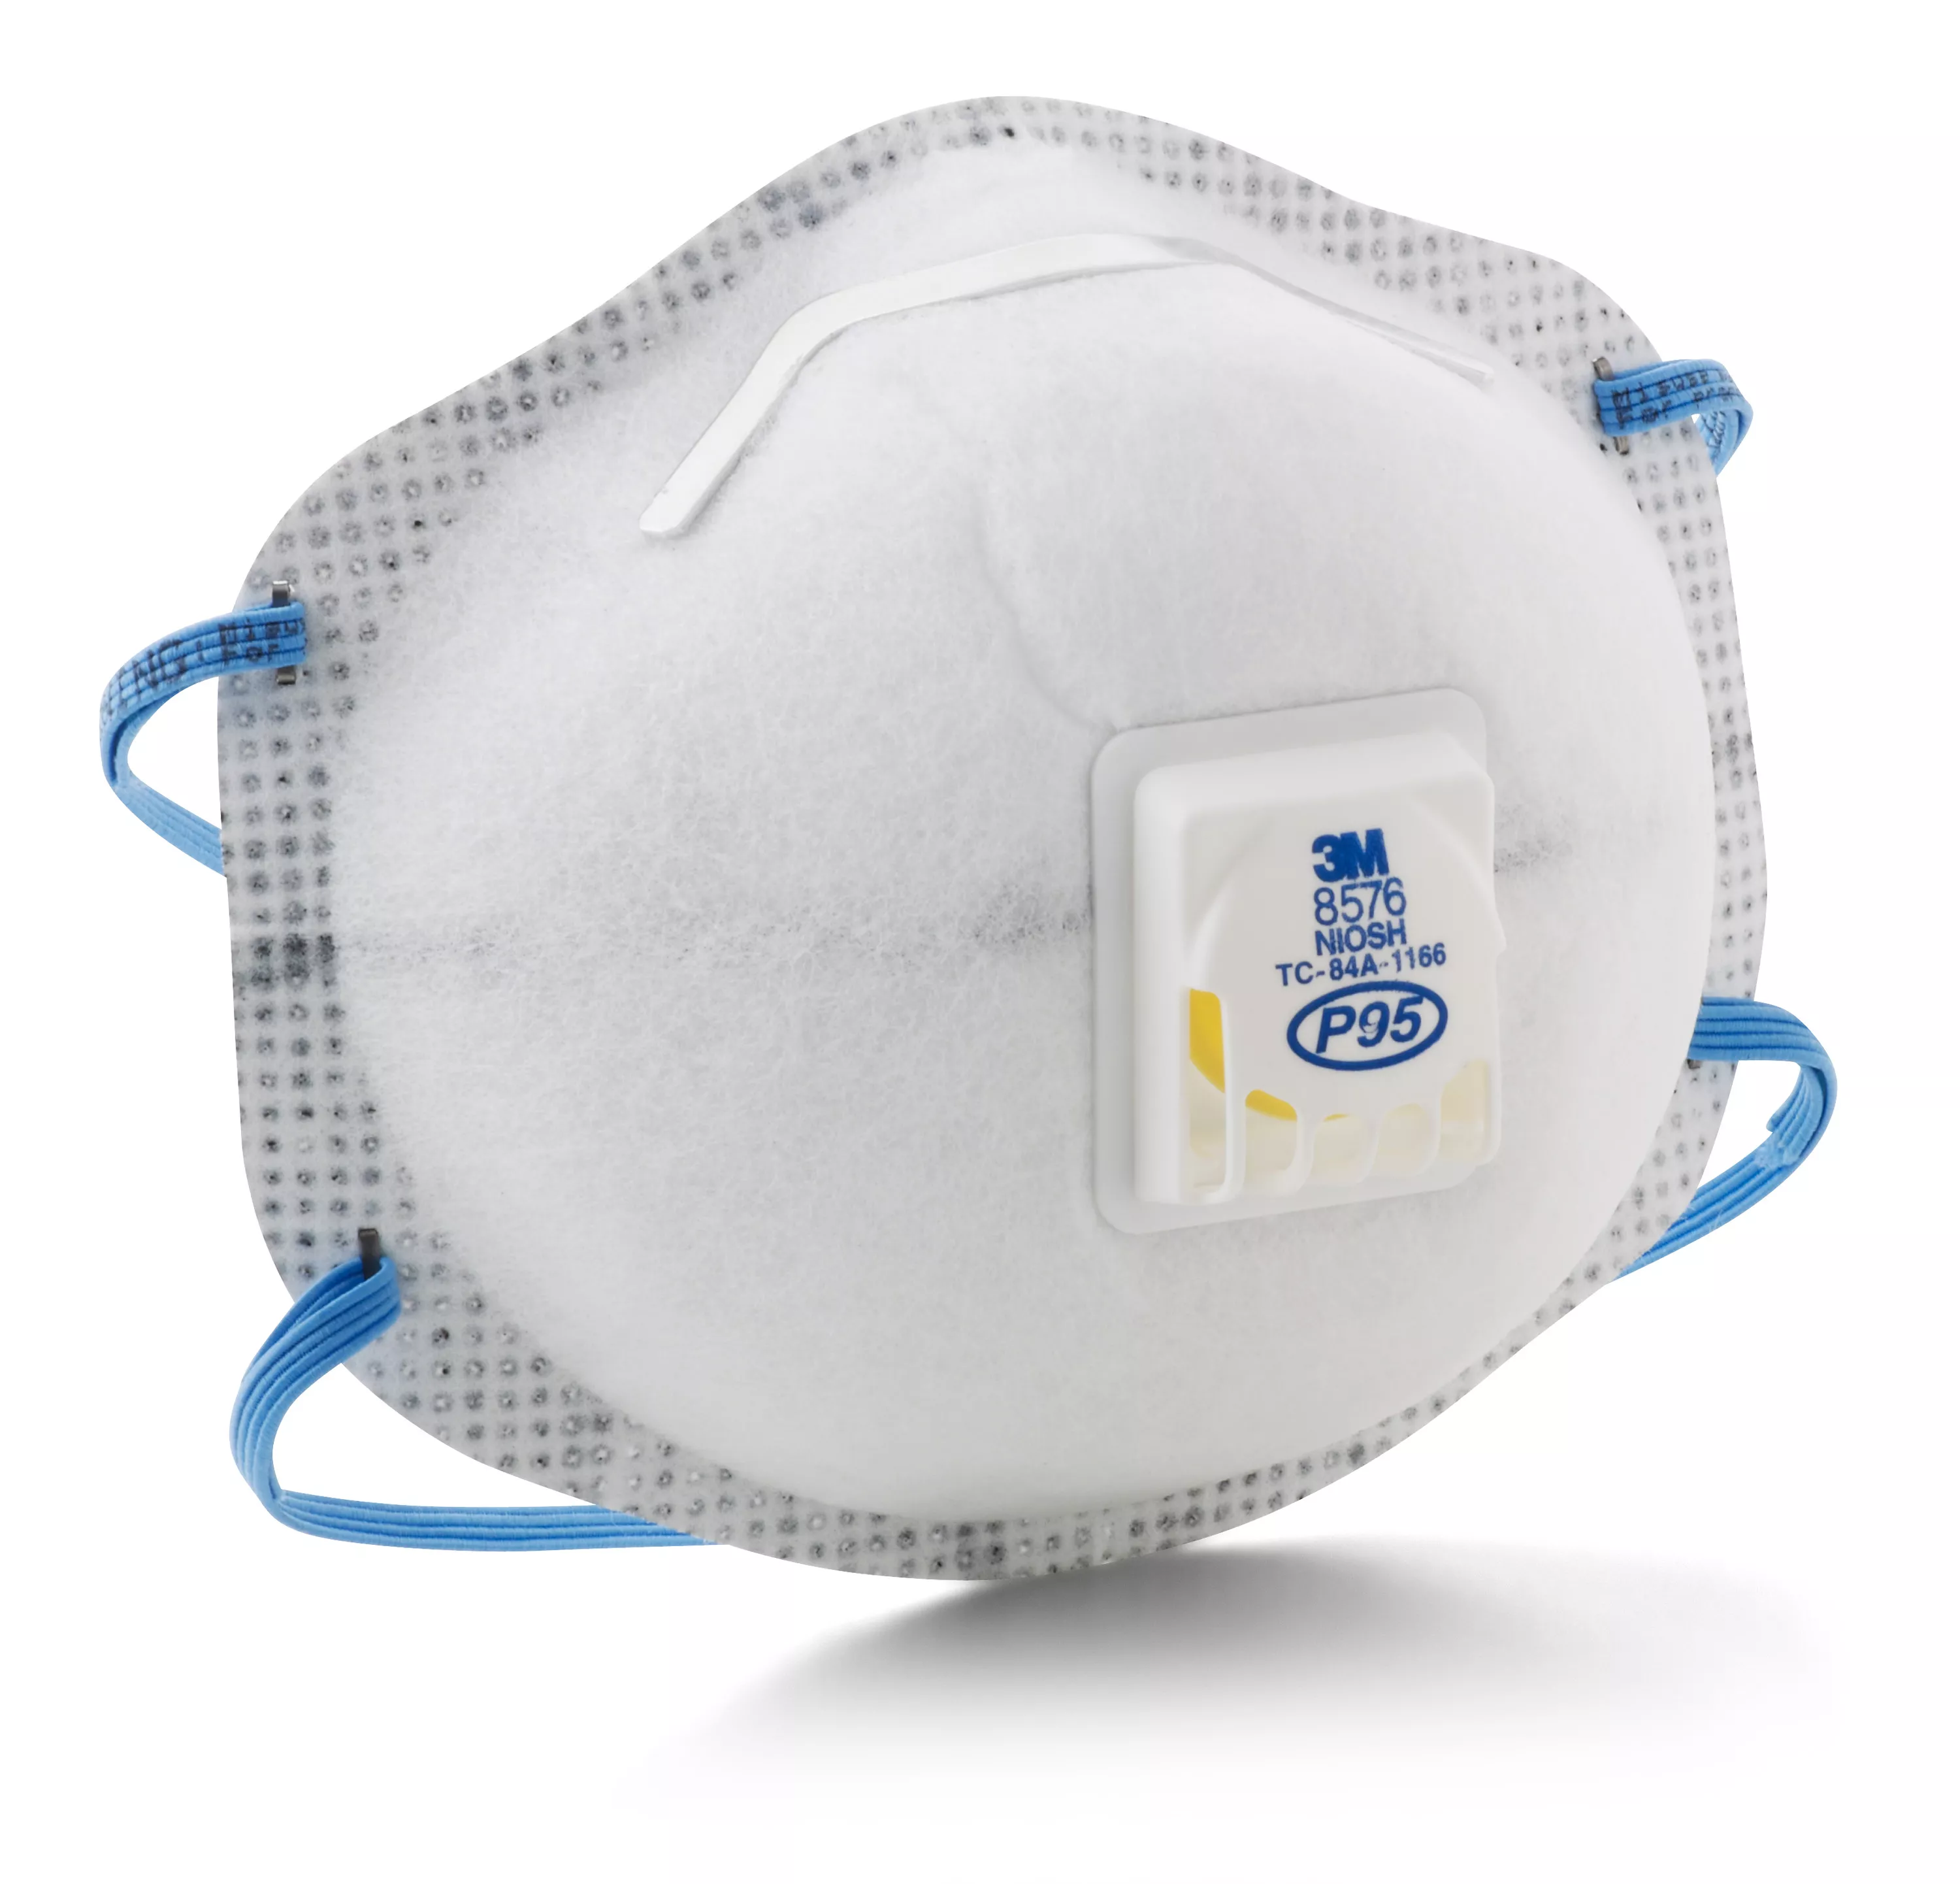 3M™ Particulate Respirator 8576, P95, with Nuisance Level Acid Gas Relief, 80 ea/Case